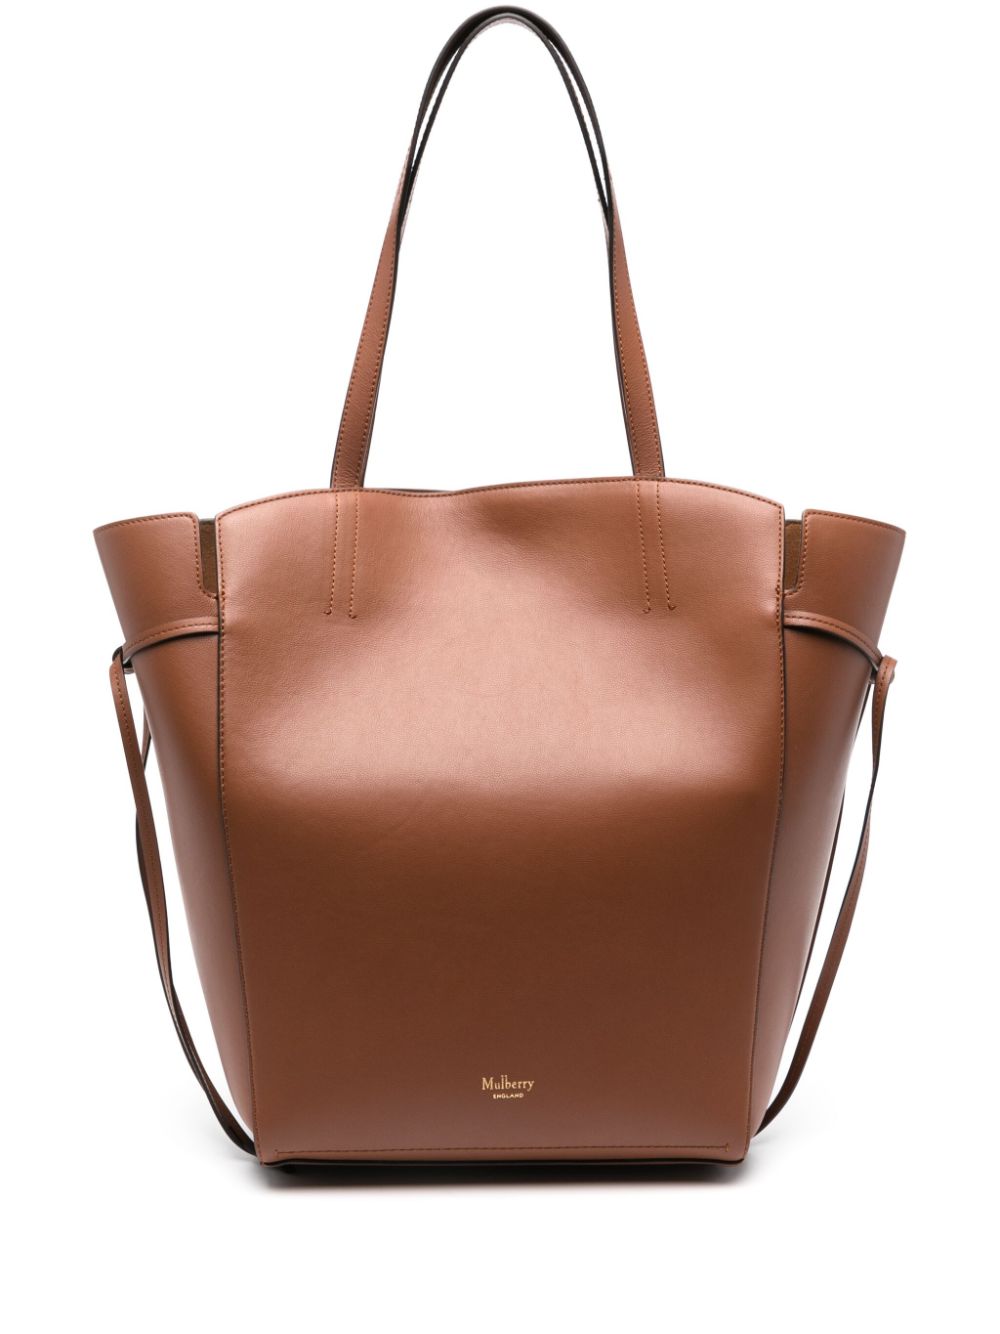 Mulberry Clovelly leather shoulder bag - Brown von Mulberry